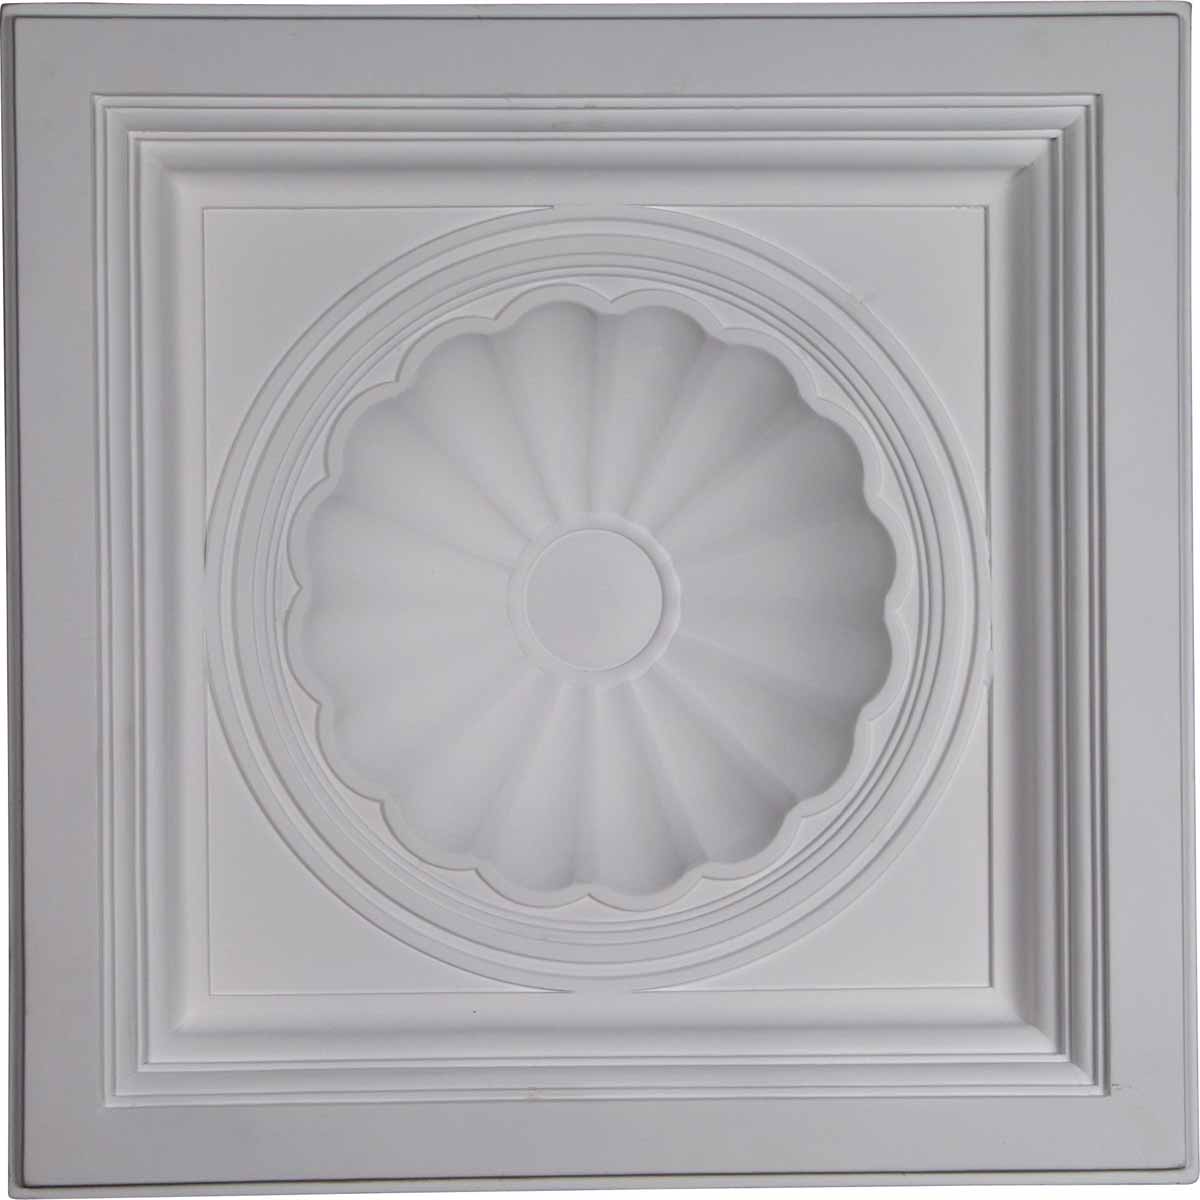 23.87 X 23.87 X 5.5 In. Shell Ceiling Tile